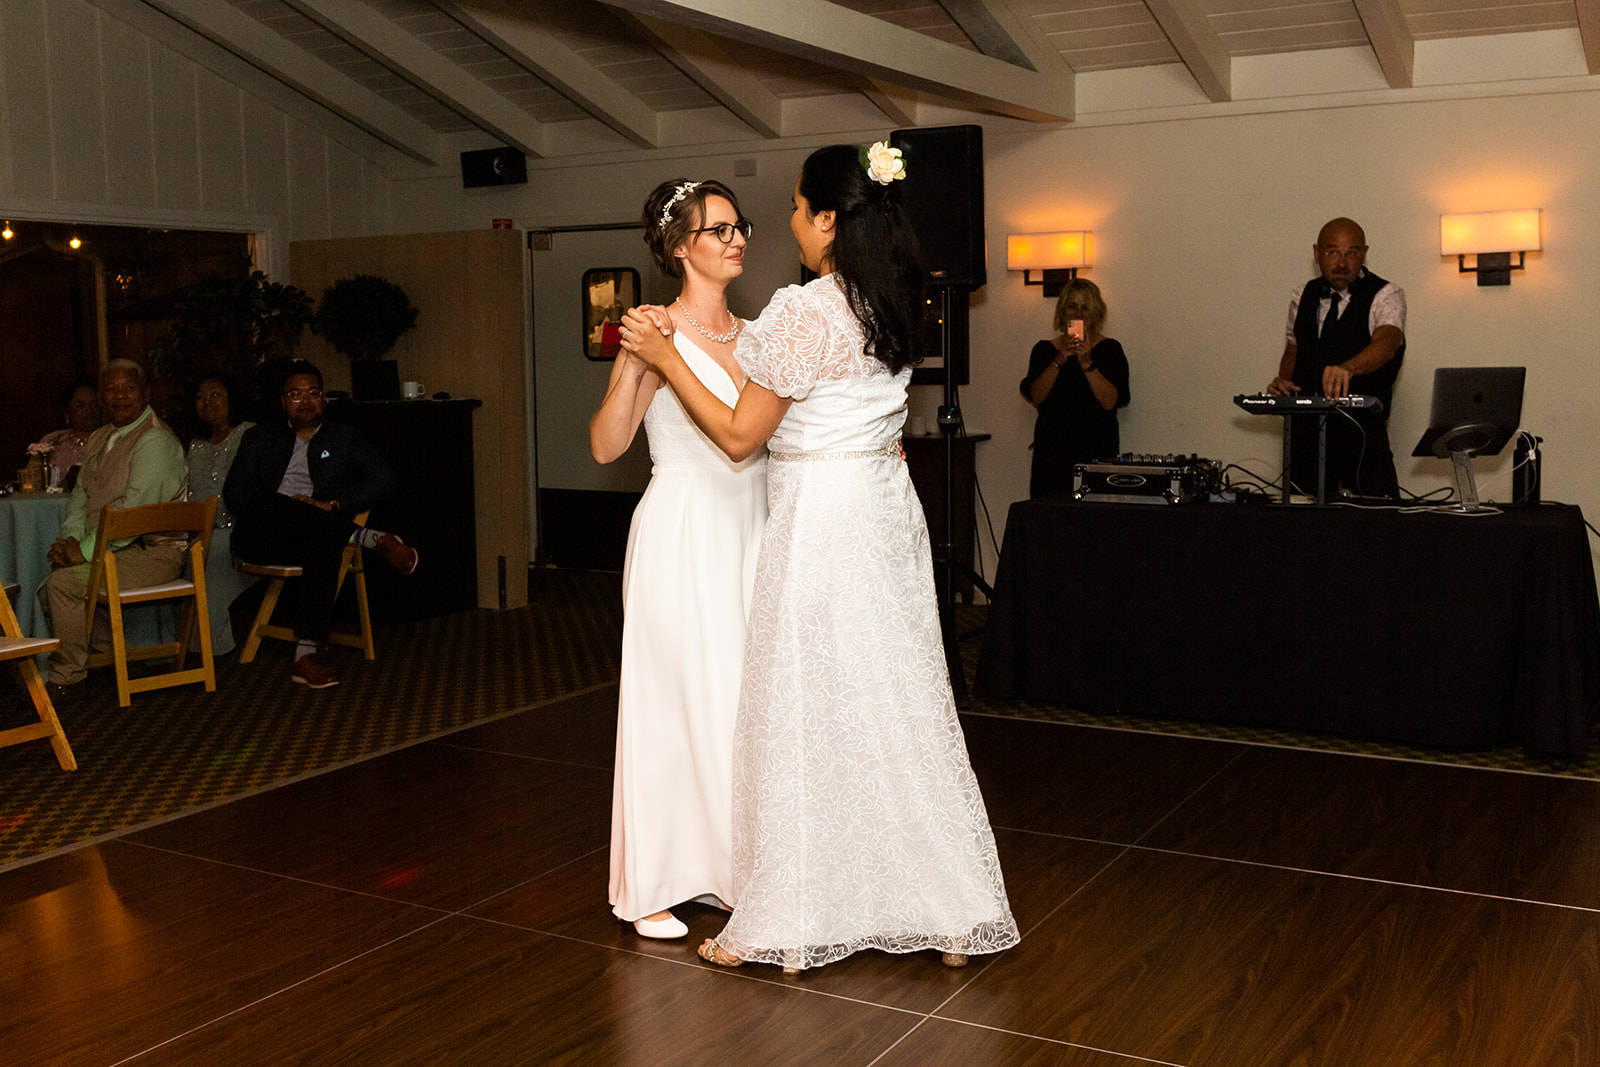 First dance with two brides in wedding dresses